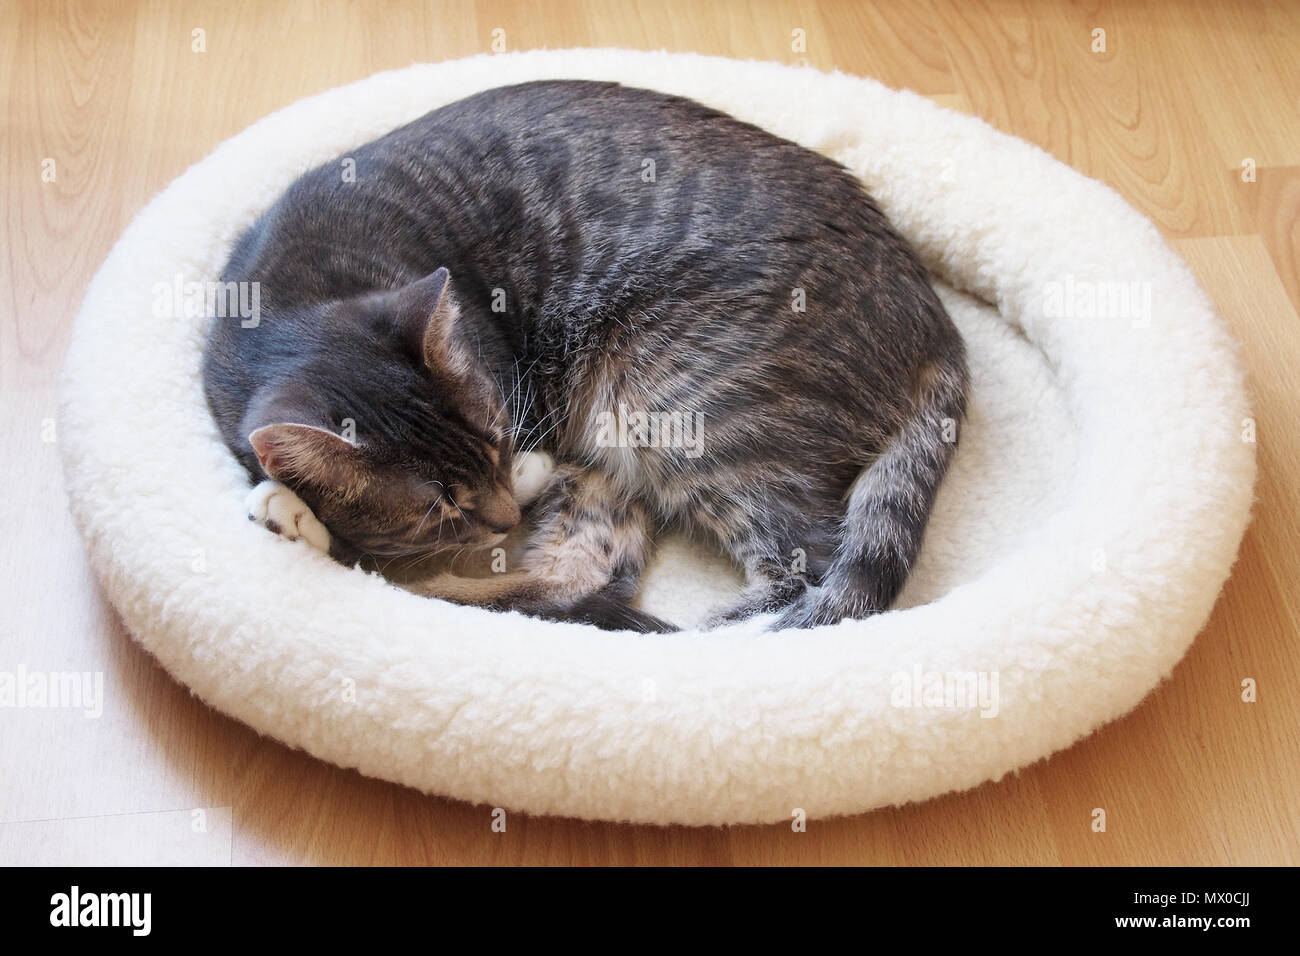 gray tabby pet cat sleeping in fleece cat bed curled up in a ball Stock Photo